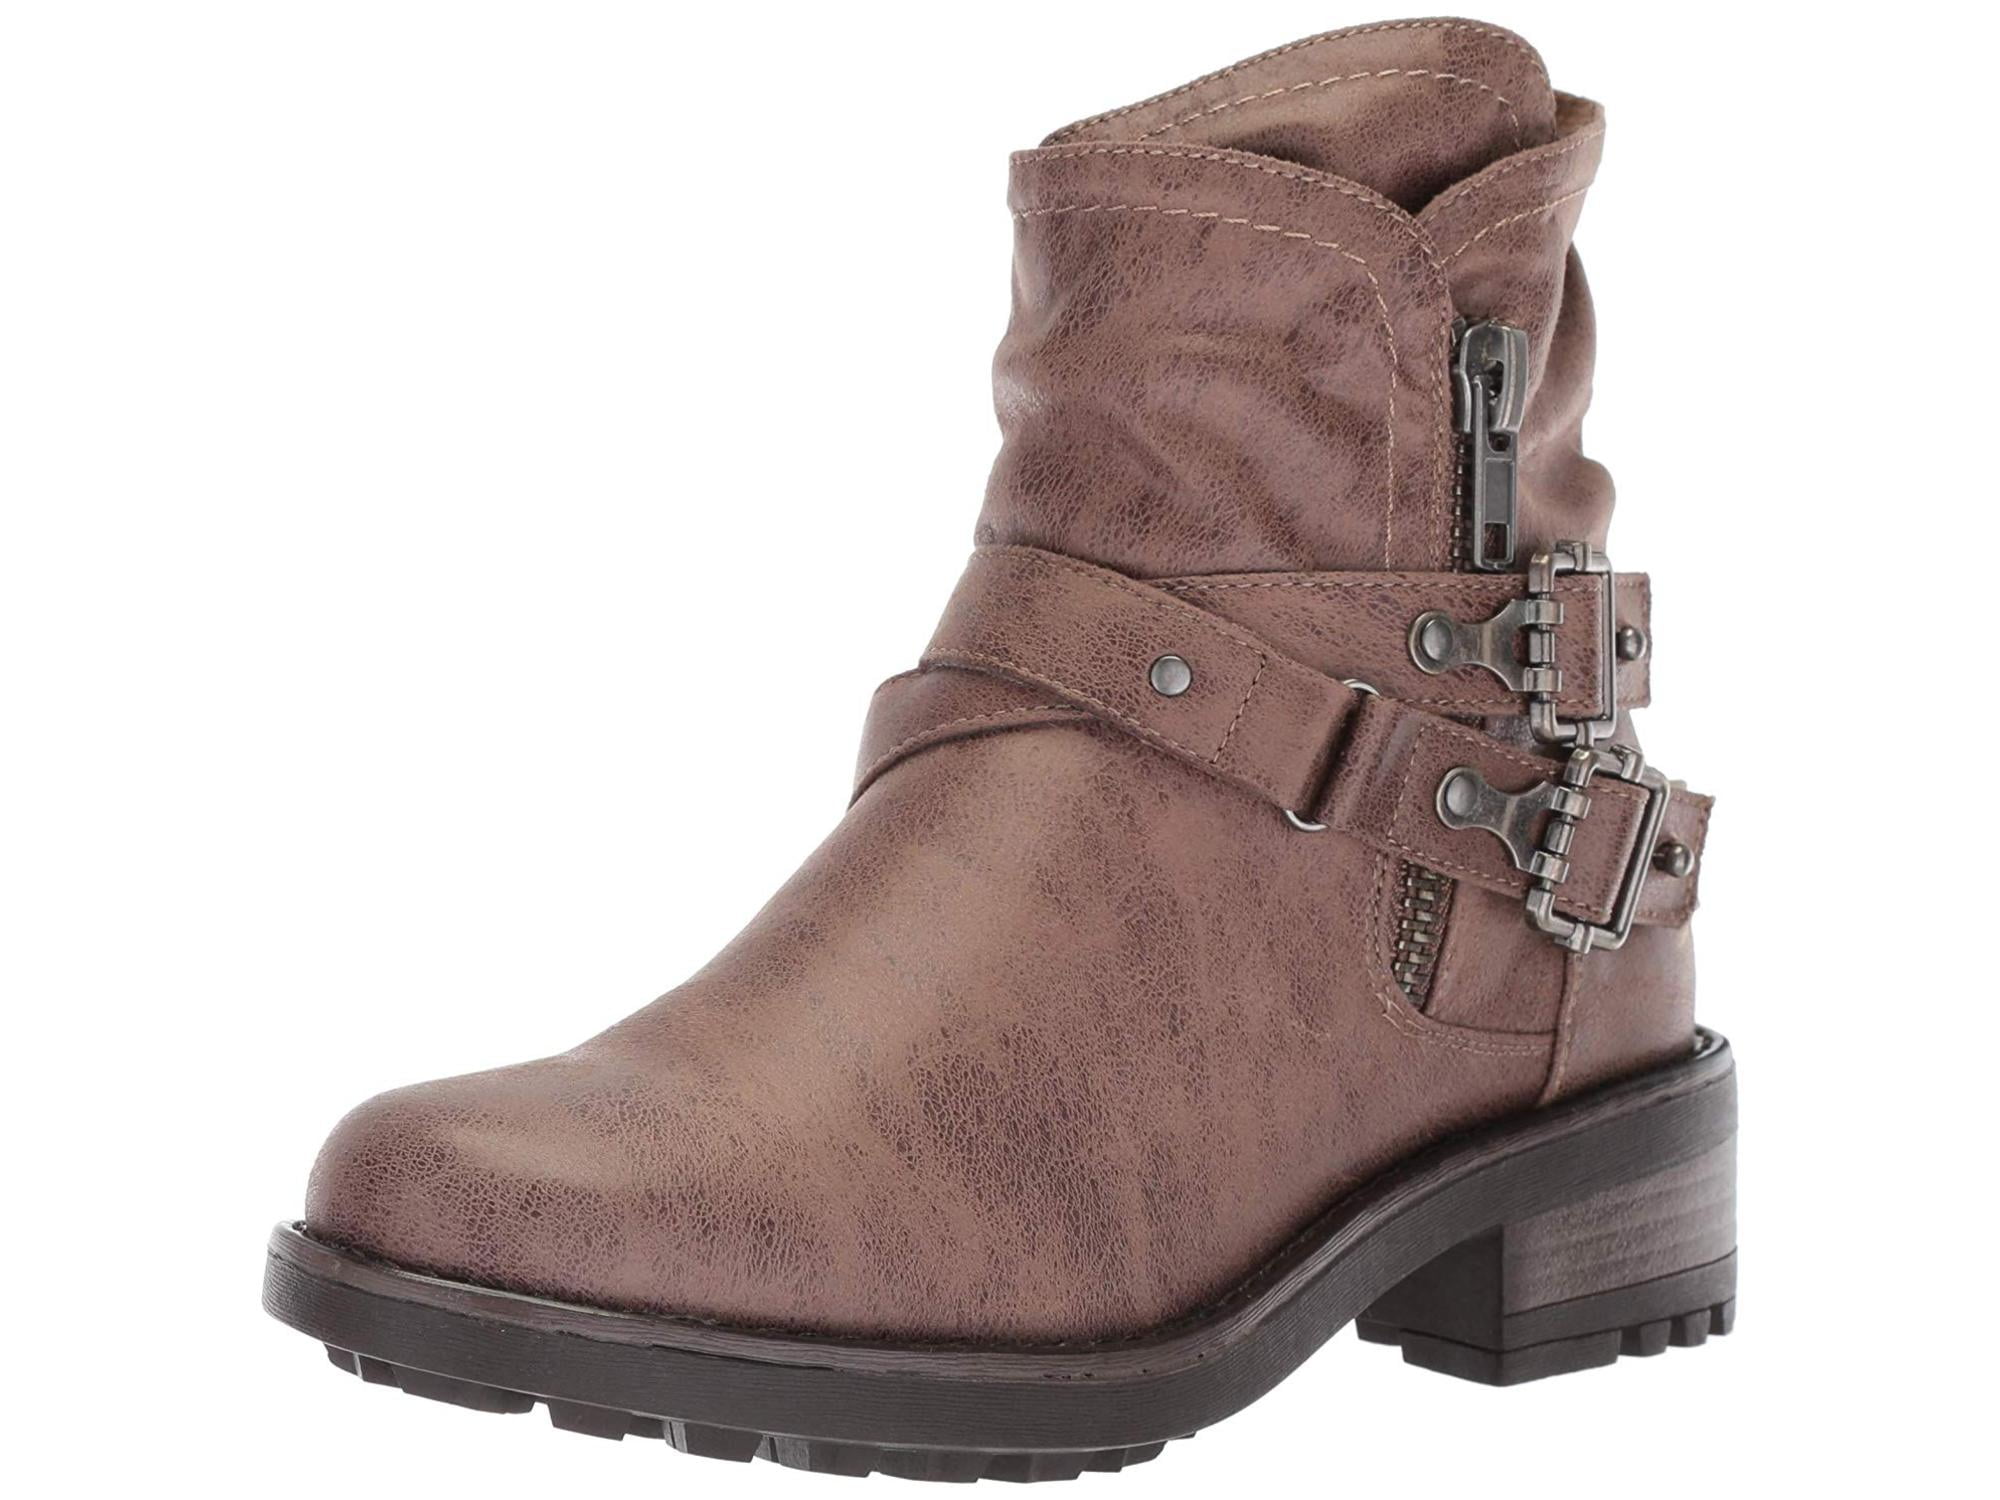 Shiloh Motorcycle Boot, Taupe, Size 